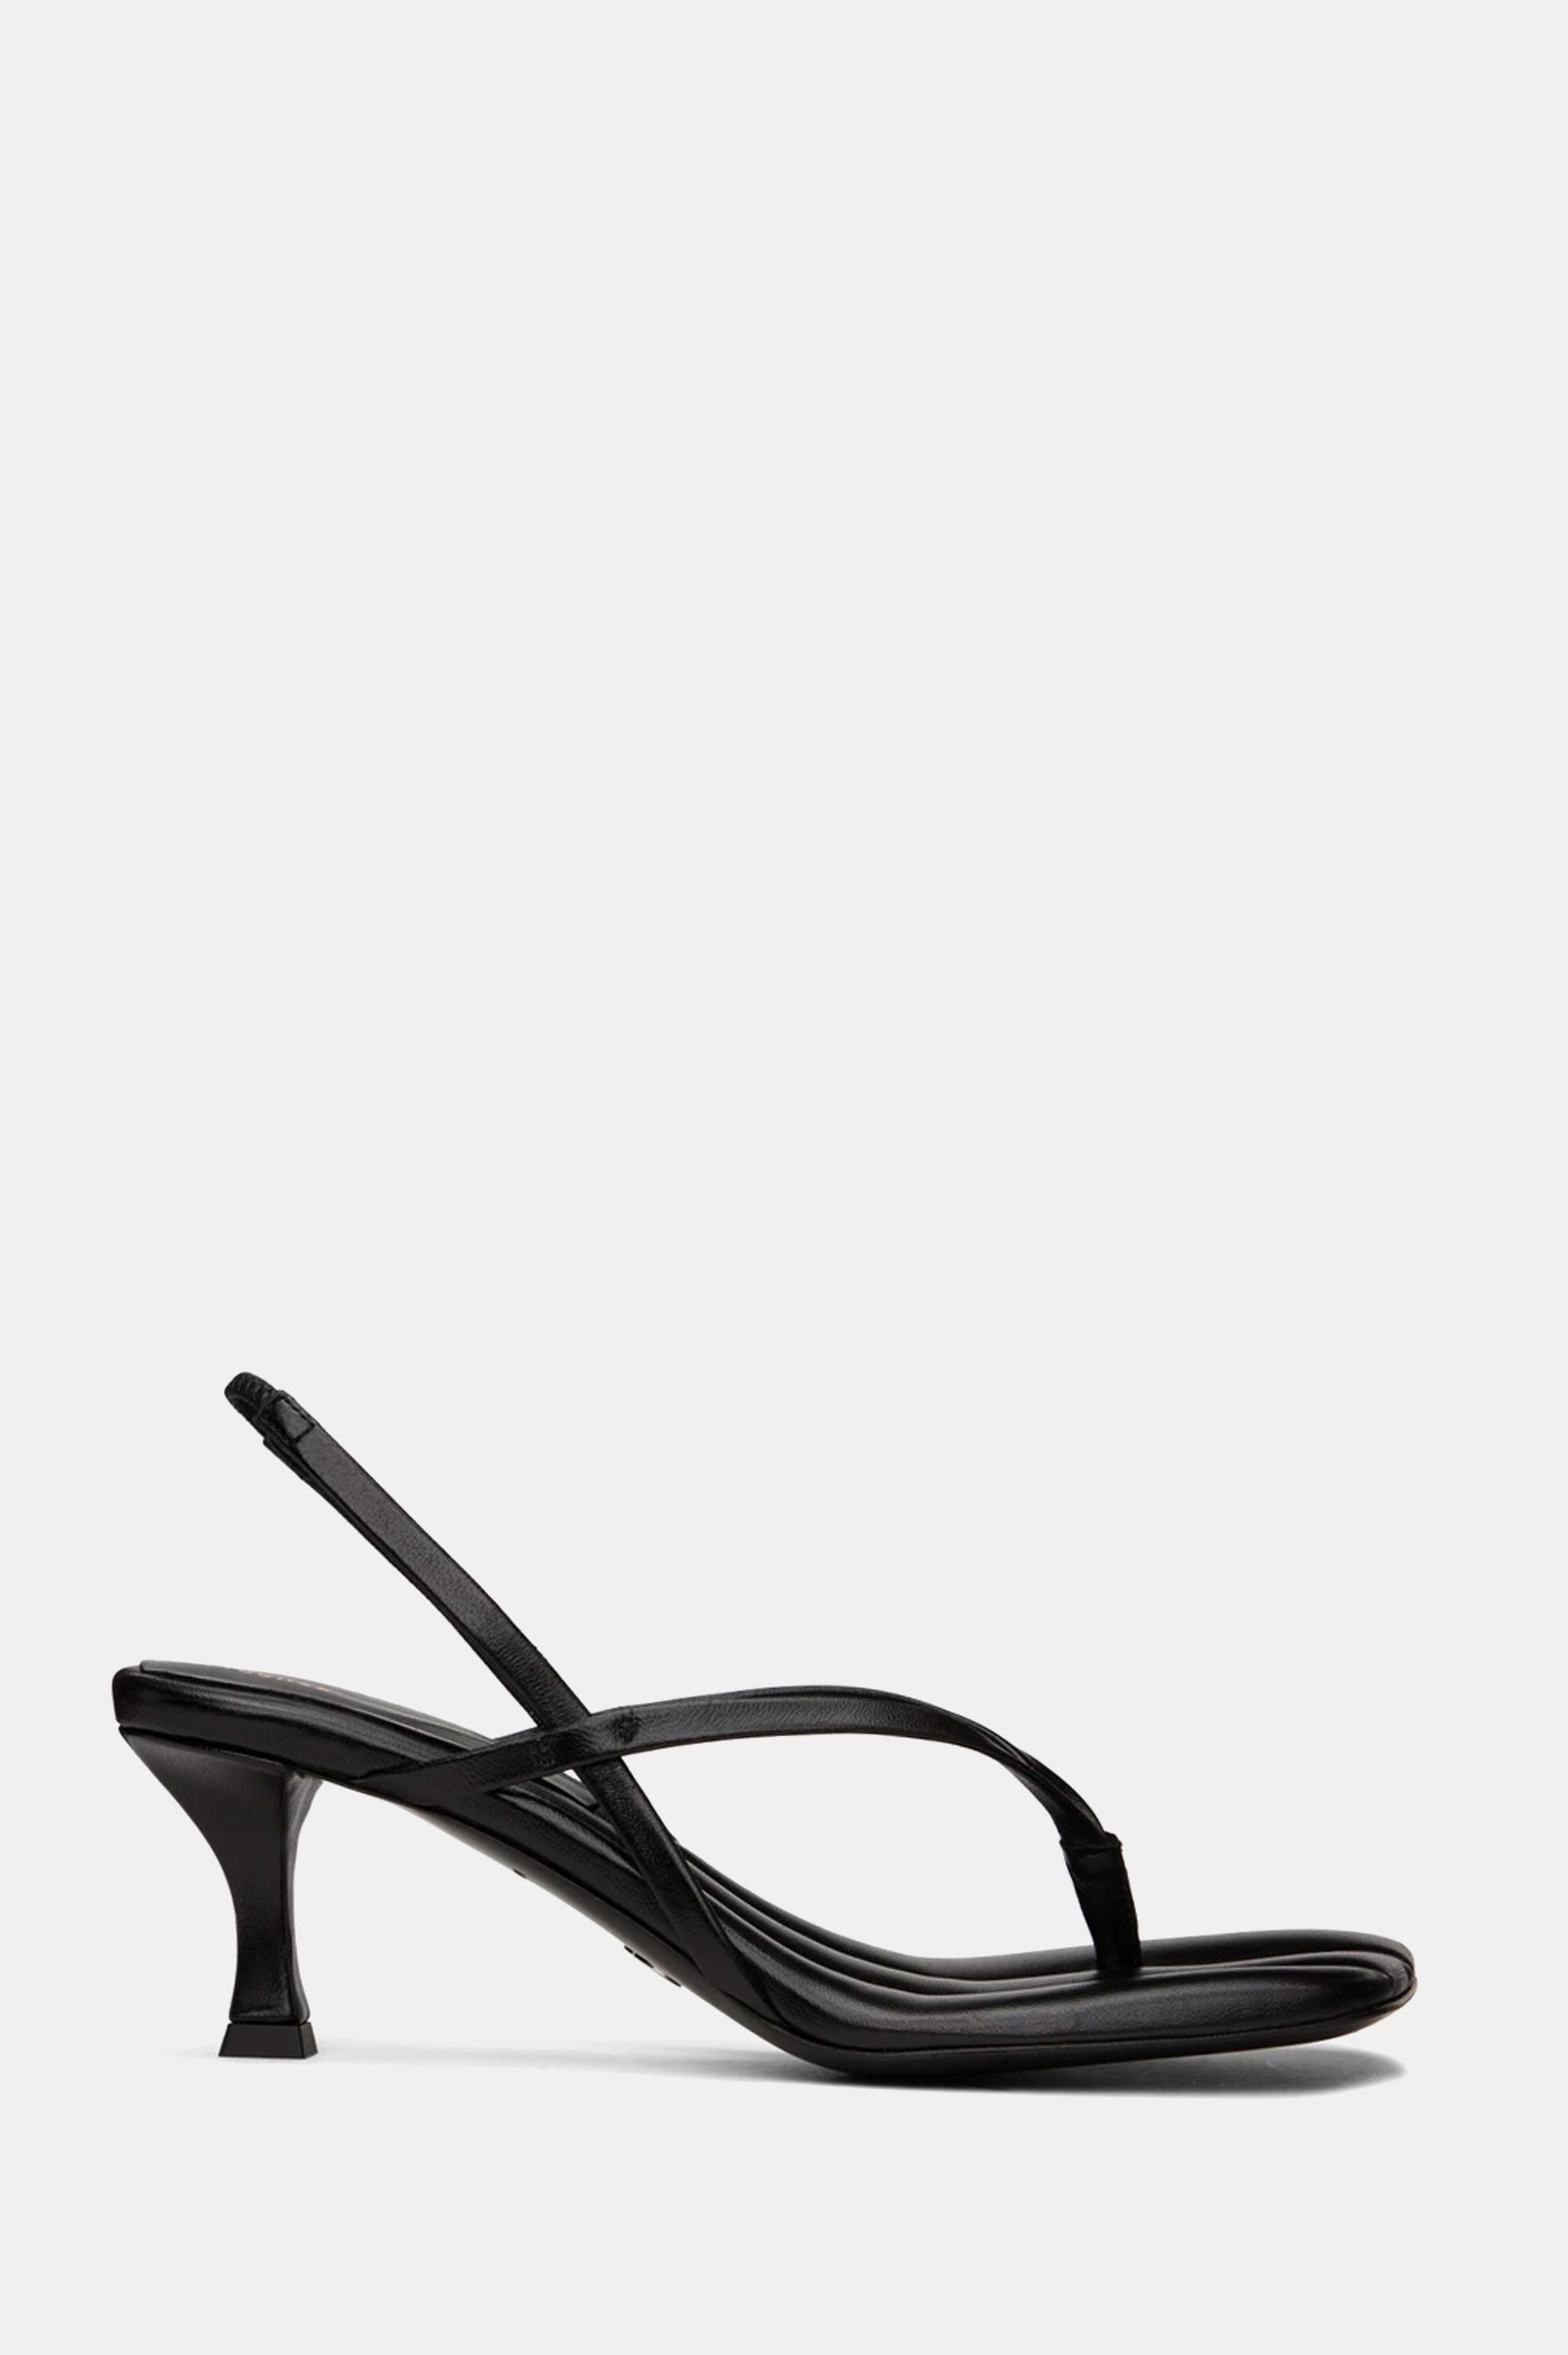 Square Thong Sandals in Black